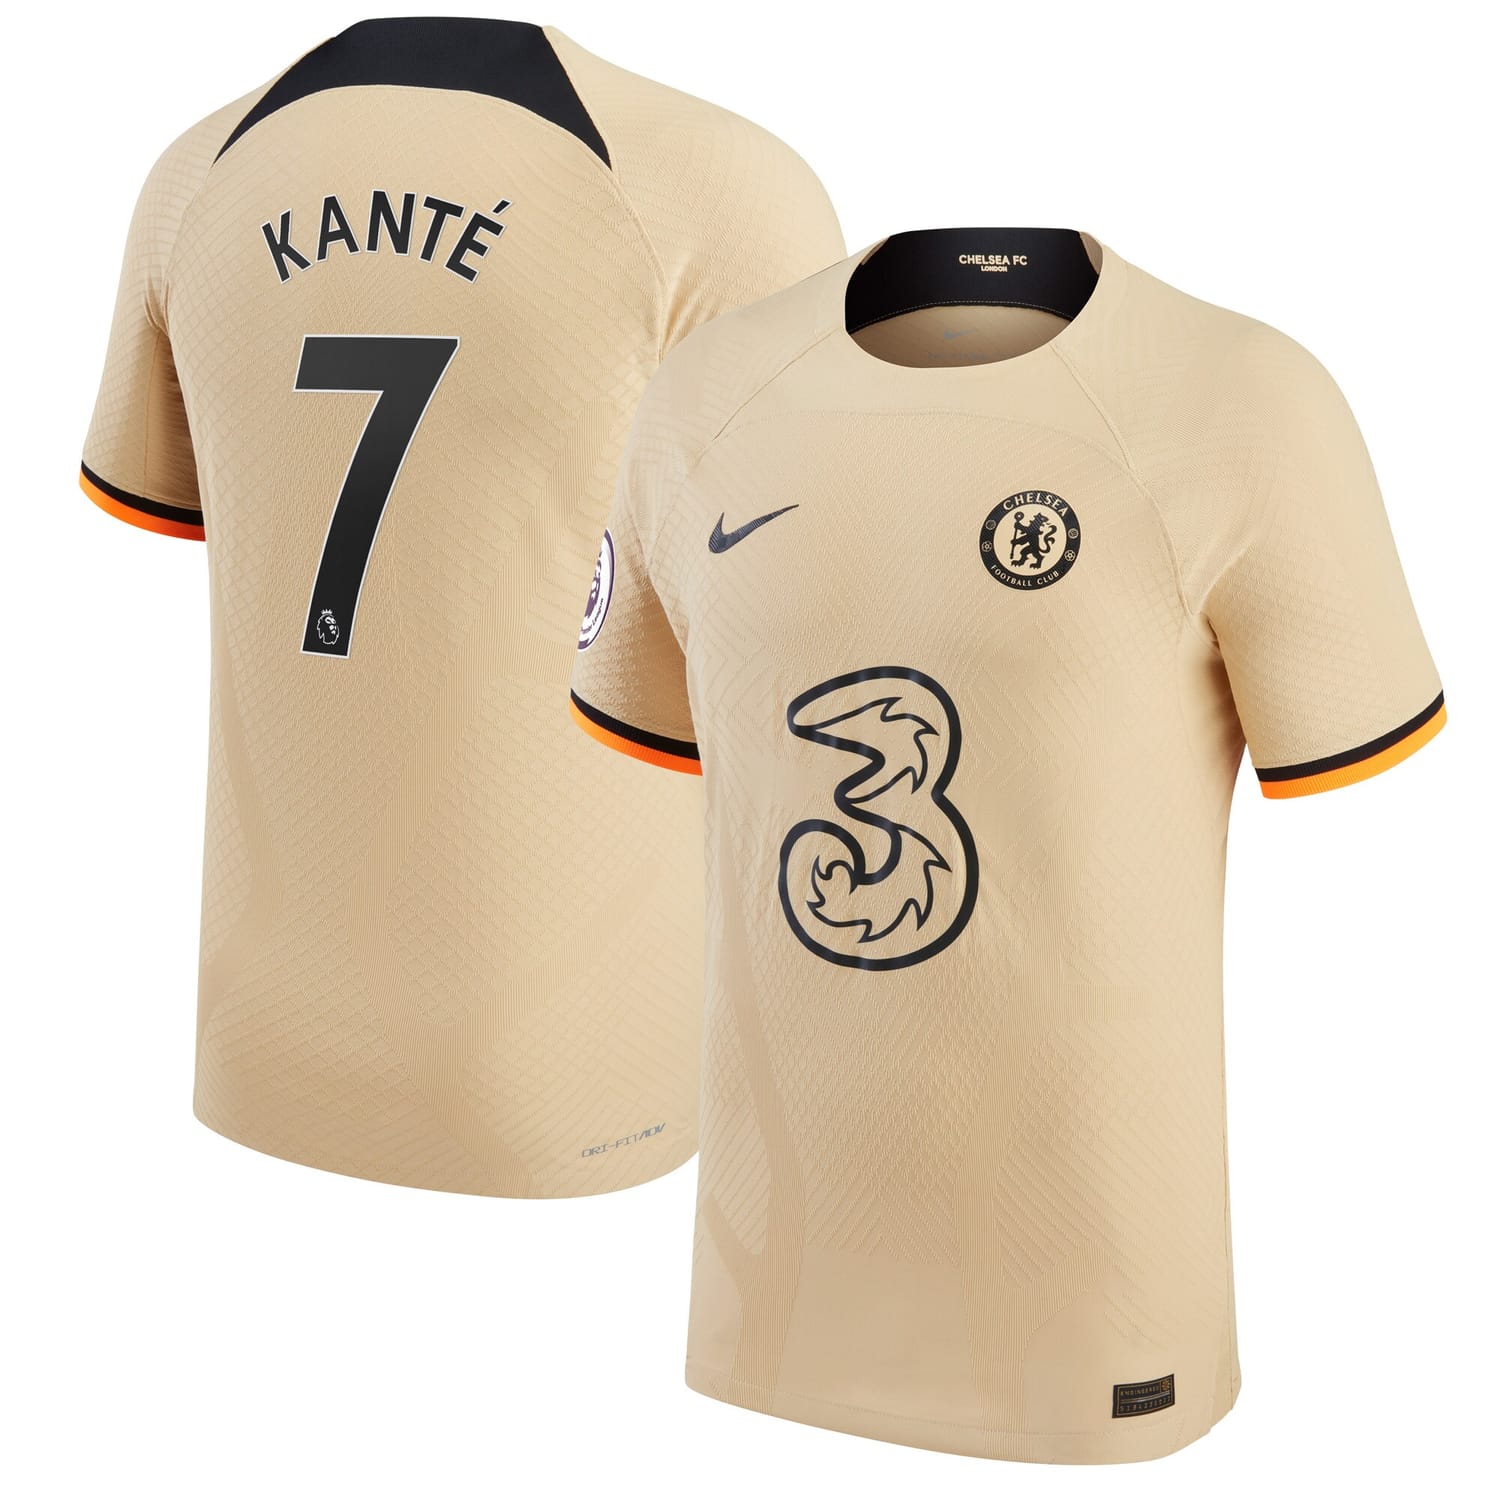 Premier League Chelsea Third Authentic Jersey Shirt Gold 2022-23 player N'Golo Kante printing for Men